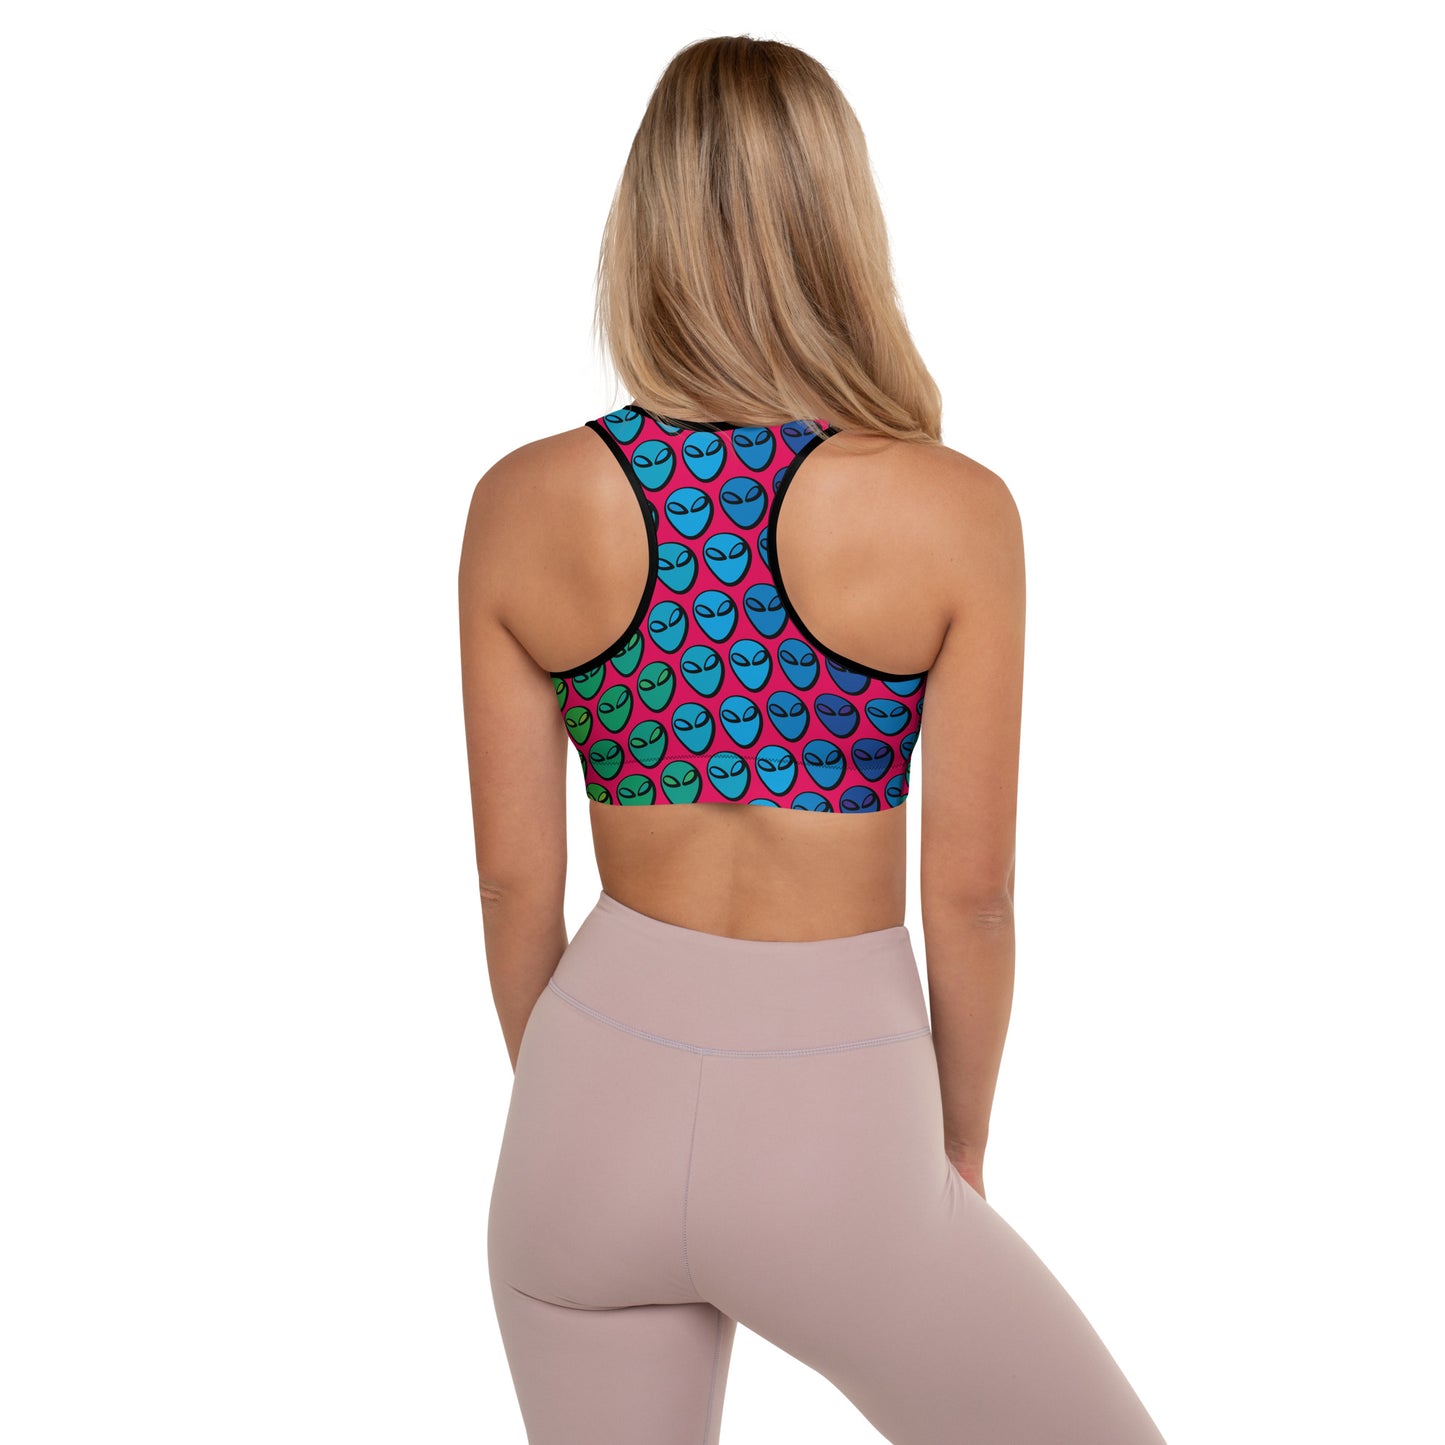 Weirdo | Padded sports bra for weird people who believe in aliens! This sports bra can also be used for yoga or whenever you wanna wear it.